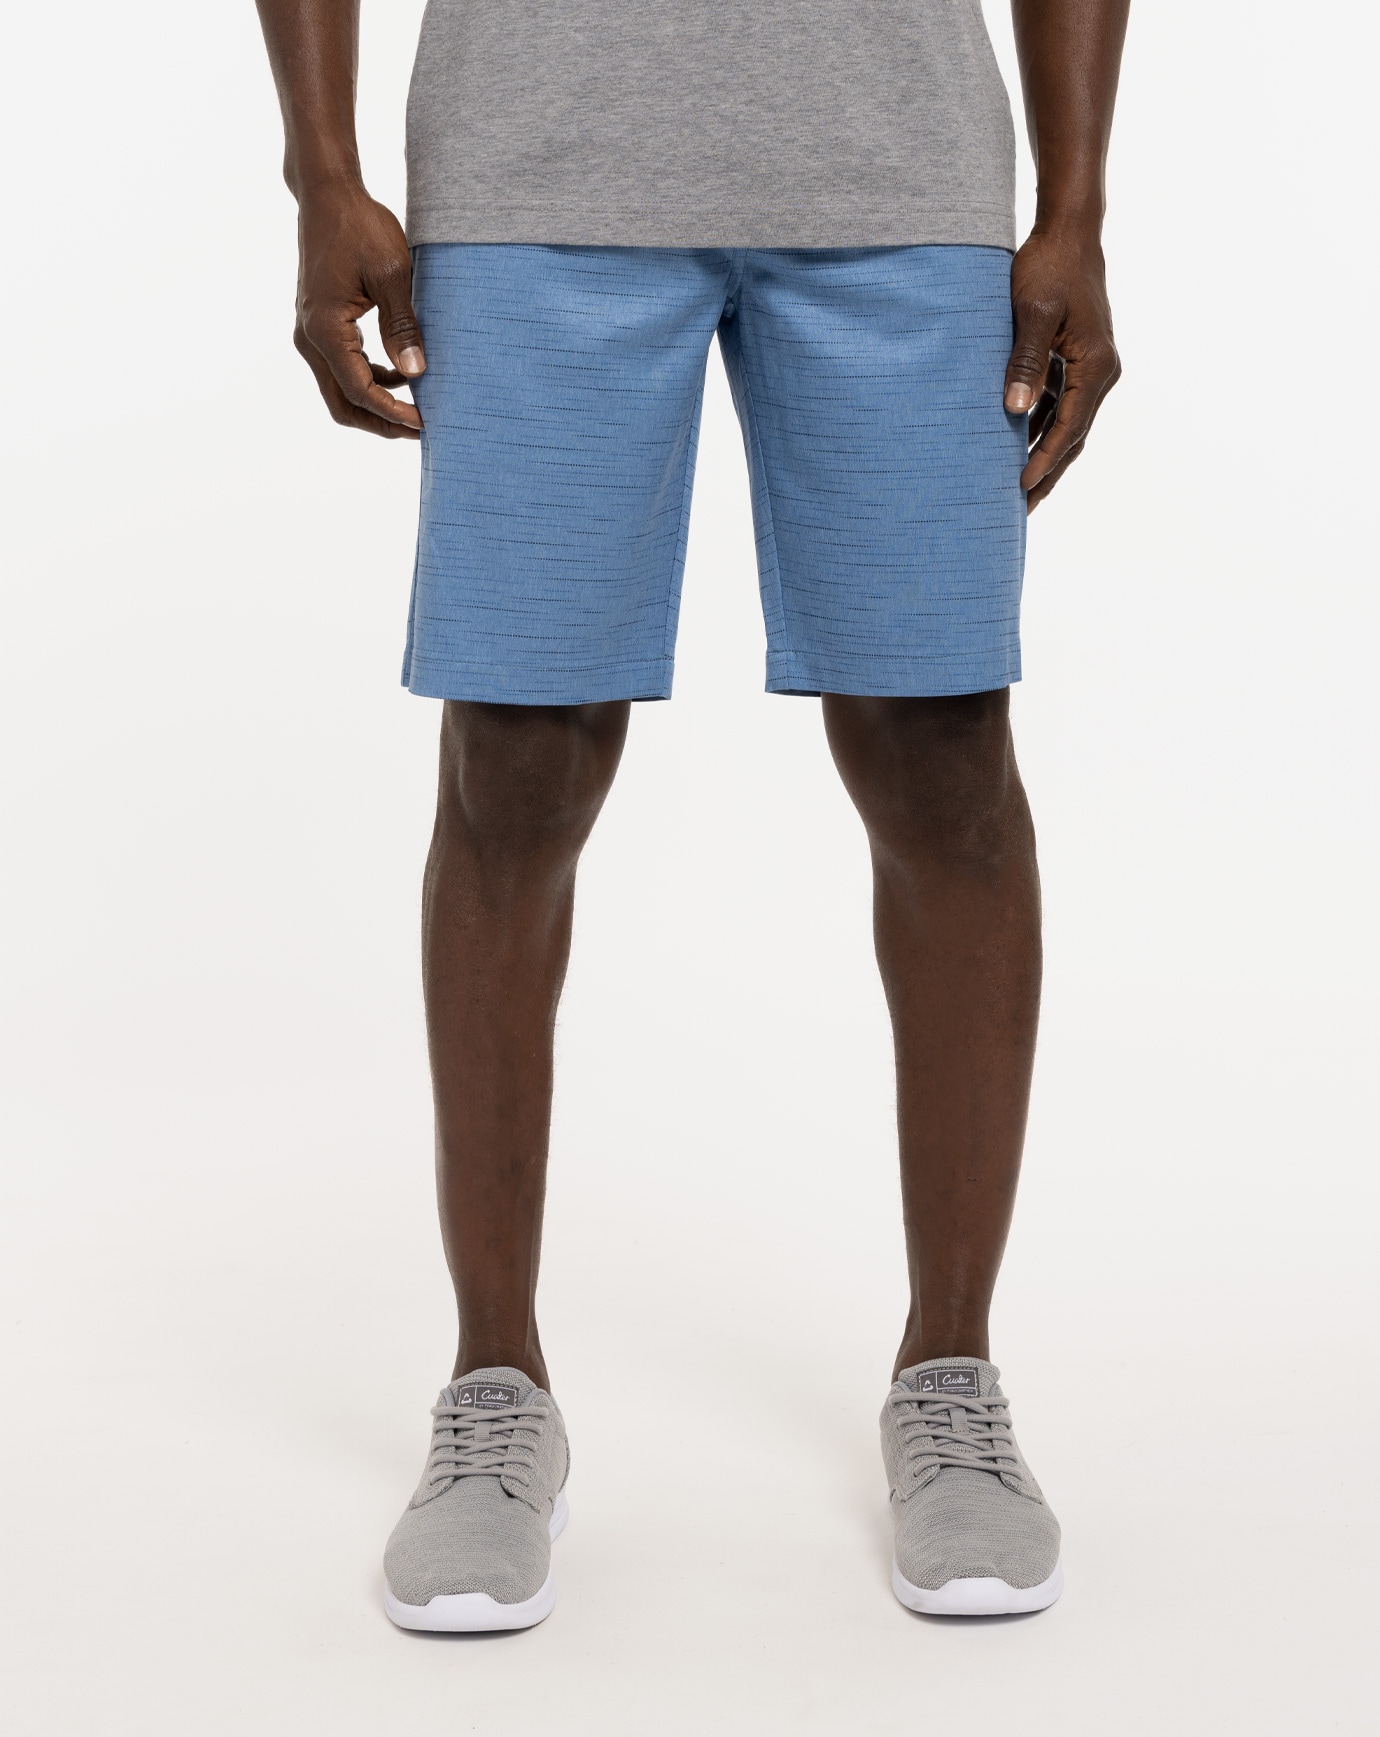 ACTION MAN CAMOUFLAGE SHORTS GREY BLUE WITH LOGO 